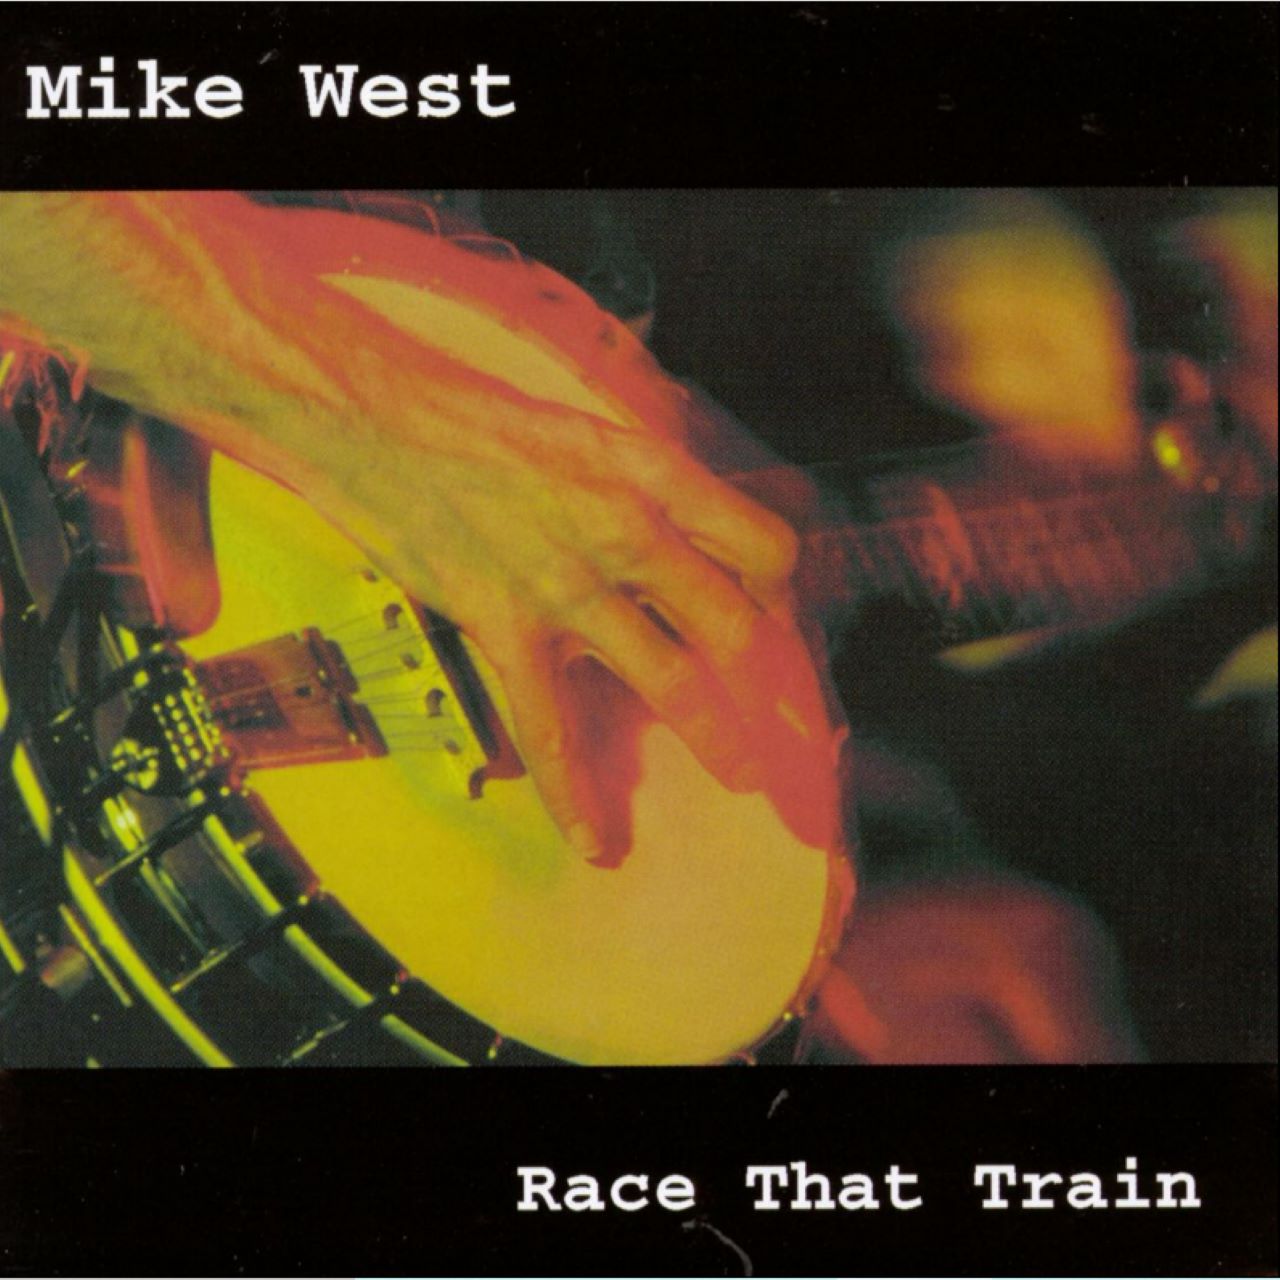 Mike West – Race That Train cover album